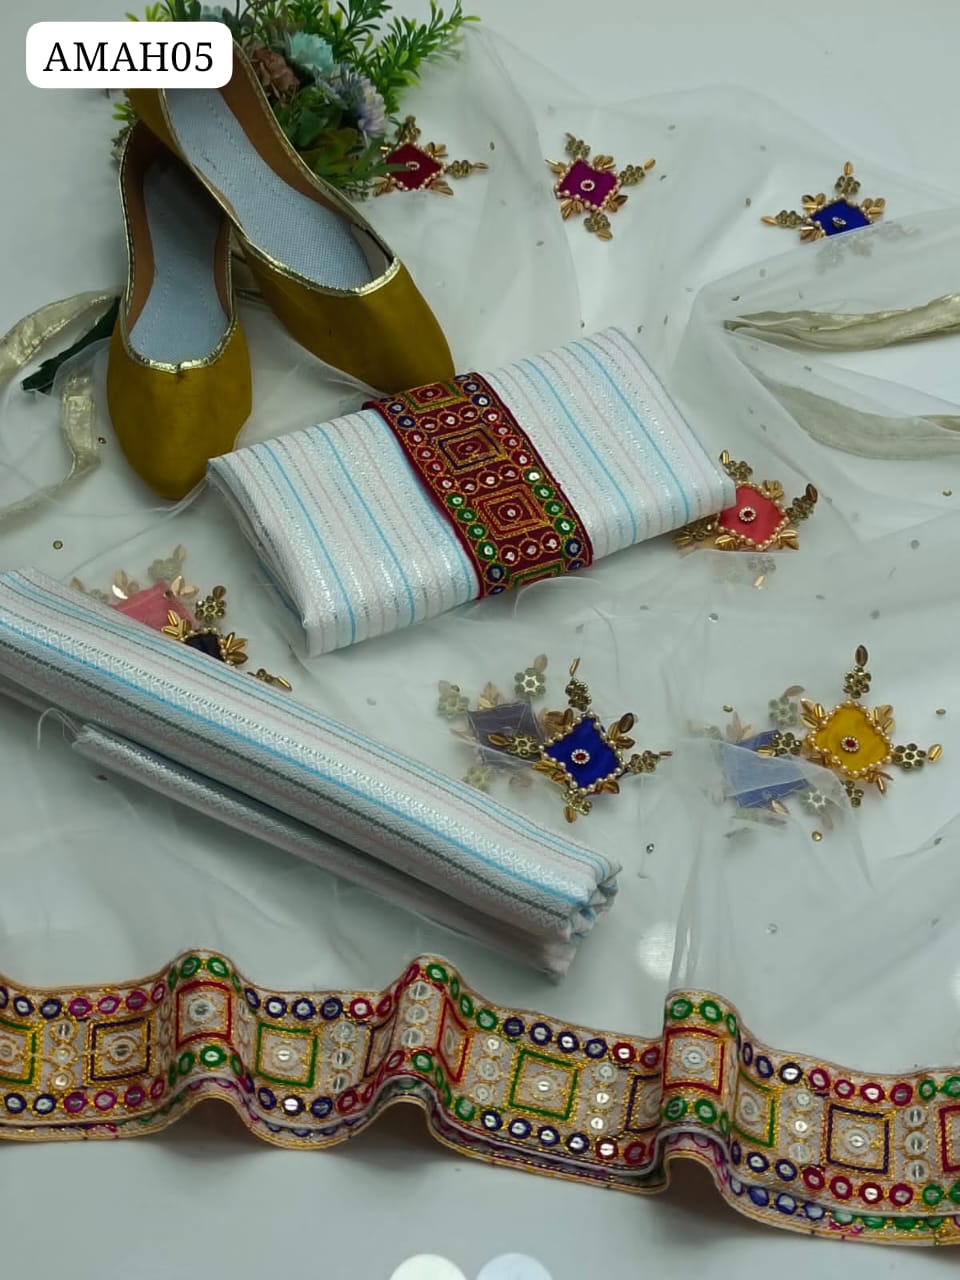 Kataan Silk Fabric Banarsi Jamawar Multi Self Designing Shirt And Same Trouser With Net Handmade Multi Applick Duppata With 2 Sided Piping & PALU Multi Lase Borders 3Pc Dress With Embroided Neckline Patti